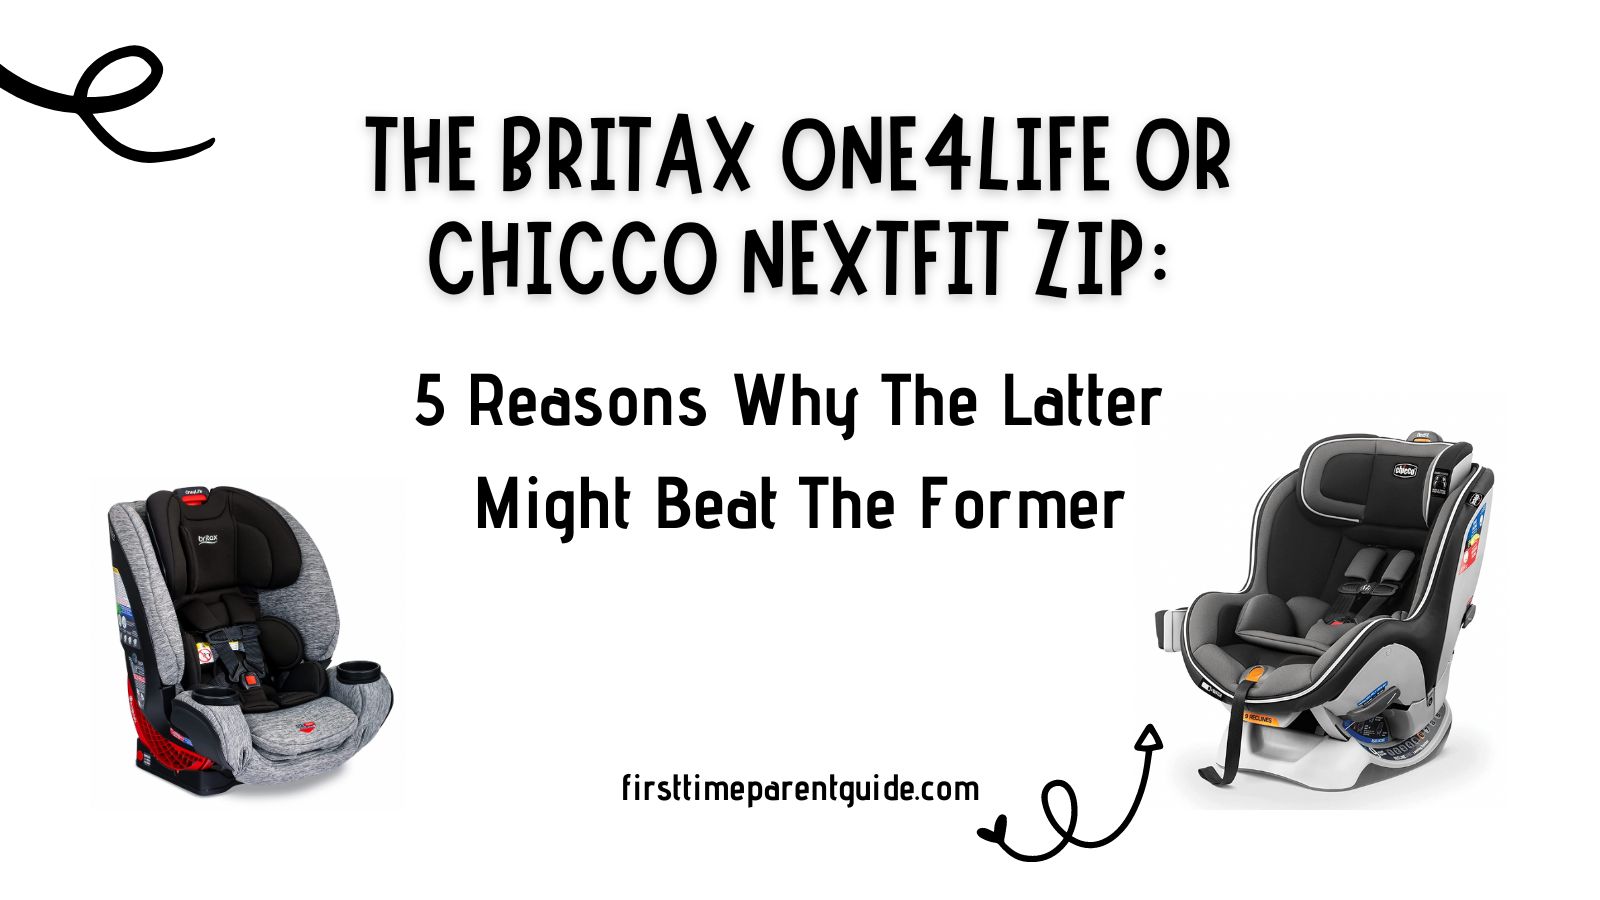 The Britax One4Life Or